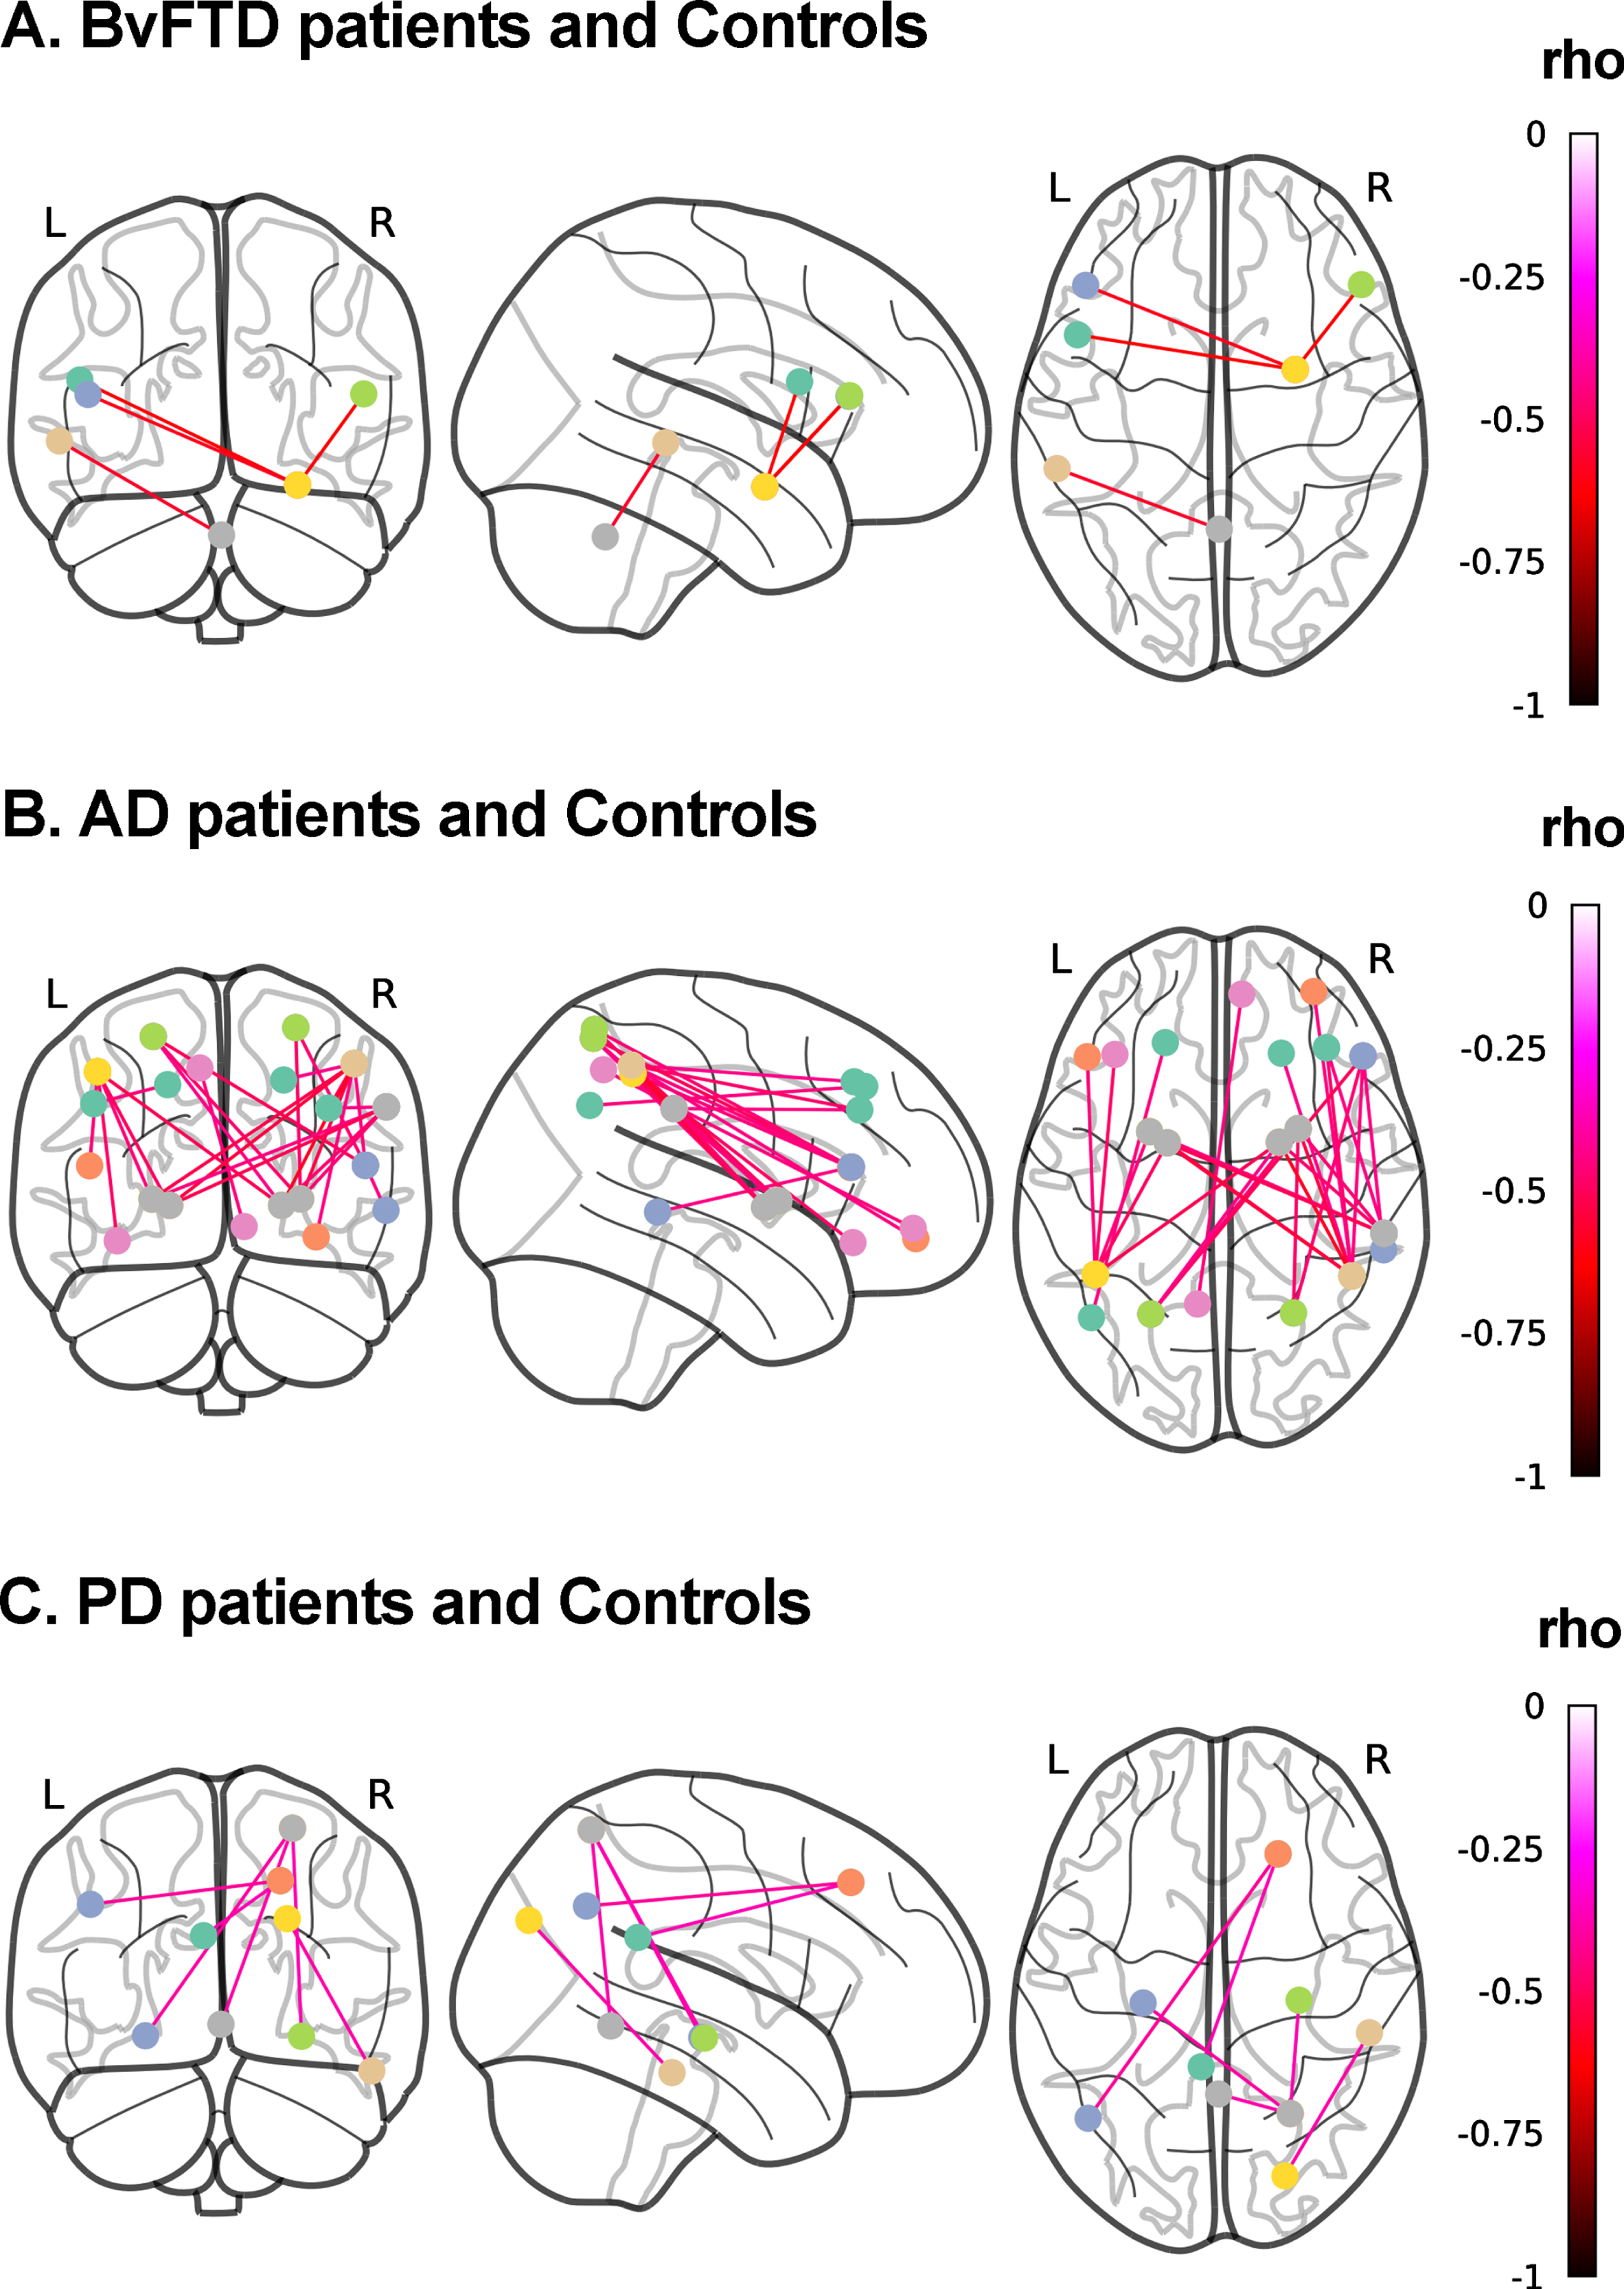 Associations between discriminant scores and functional connectivity. Whole-brain analyses over 116 regions of interest from the AAL atlas were performed to test the association between the FC of each pair of brain areas and top discriminant scores in each patient group in tandem with demographically-matched controls (p < 0.001, uncorrected). A) BvFTD patients and controls. Social cognition and CS (MiniSEA and MoCA) outcomes were associated with frontal (inferior frontal gyri/pars triangularis and pars opercularis) and amygdalar networks. B) AD patients and controls. CS (MoCA) results were associated with (a) parietal (parietal superior and inferior lobules, and precuneus and angular gyrus) and frontal (inferior frontal gyrus triangular and orbital, and frontal superior and middle gyri), and (b) parietal superior and inferior lobules, supramarginal gyrus) and basal ganglia (pallidum and putamen) networks. C) PD patients and controls. Social cognition (MiniSEA) results were associated with (a) parietal (parietal superior lobule), temporal (hippocampi) and cerebellar networks, (b) frontal (superior frontal gyrus) and pariental (angular gryus and posterior cingulate) networks, and (c) temporal (inferior temporal gyrus) and occipital (superior occipital gyrus) networks. AD, Alzheimer’s disease; bvFTD, behavioral variant frontotemporal dementia; L, left; PD, Parkinson’s disease; R, right.